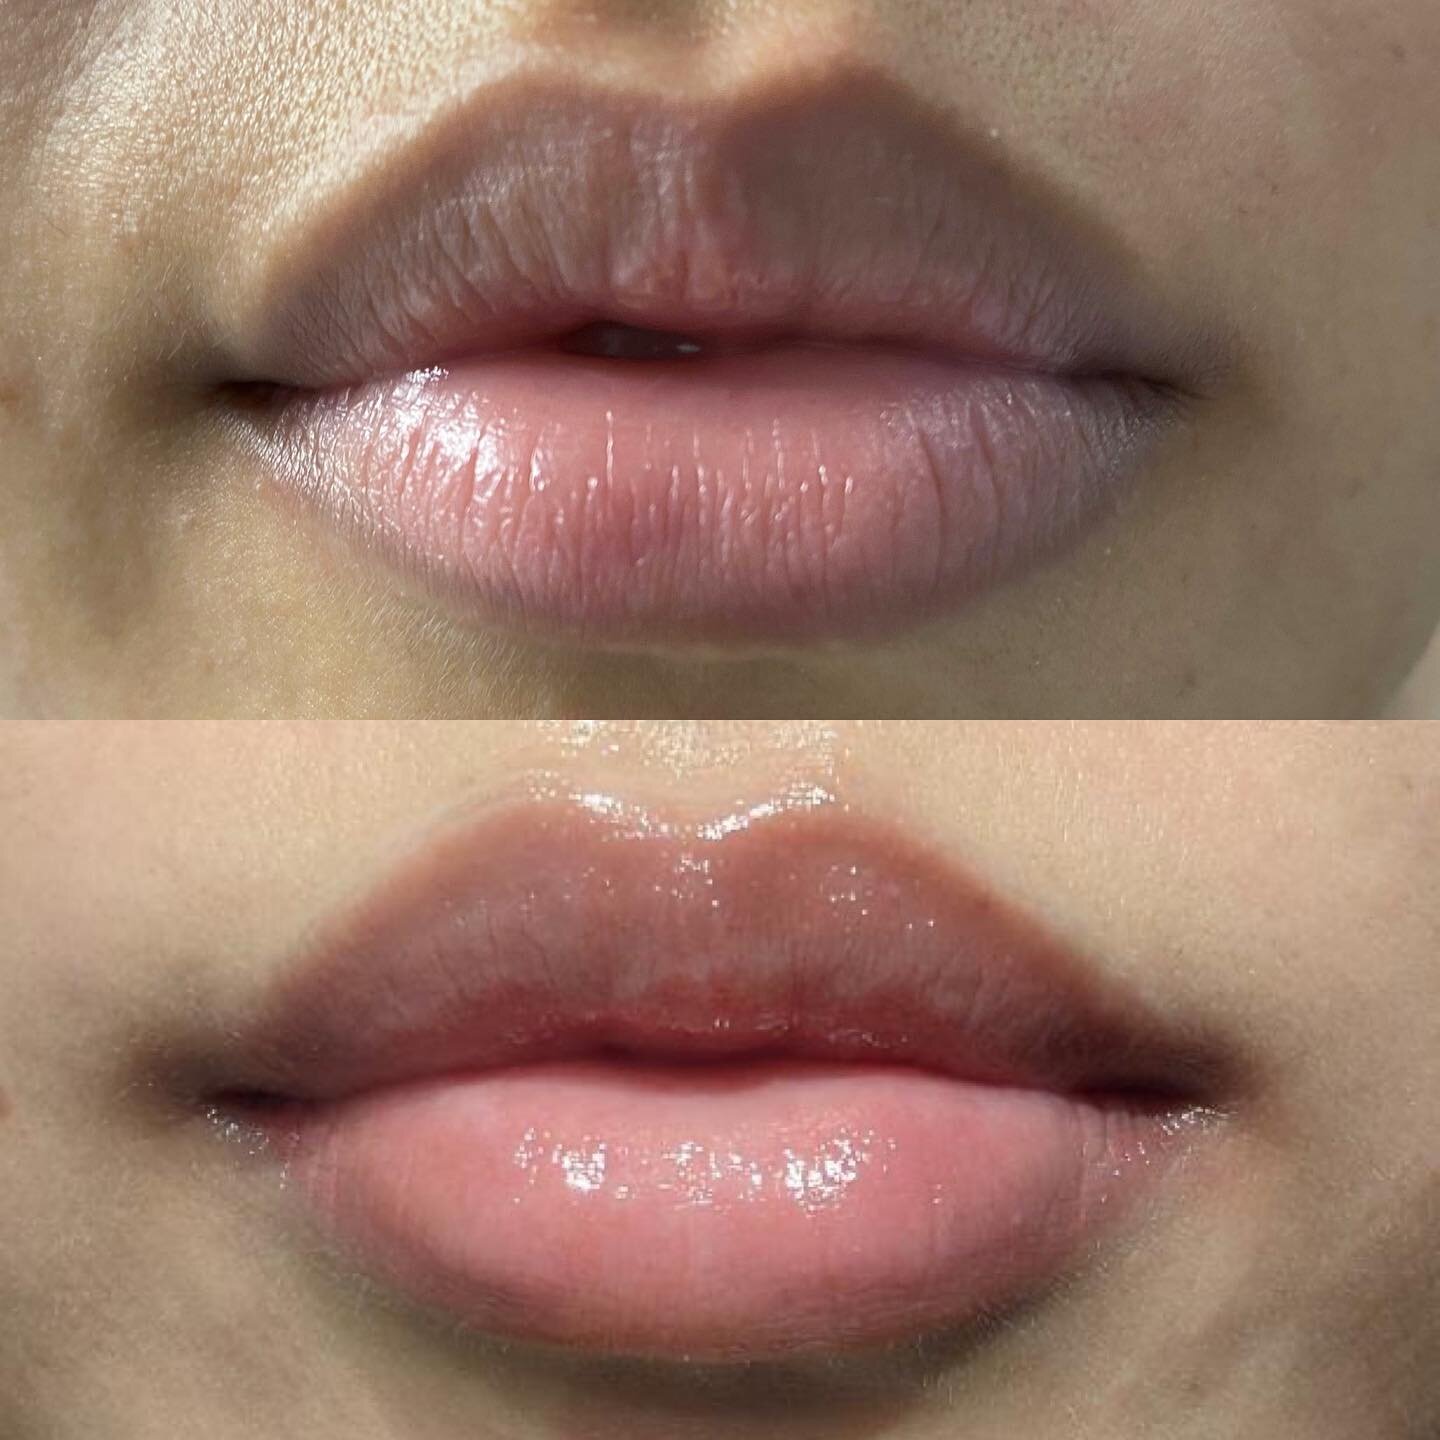 Hello everyone!

A some of you may or may not know, @torontobeautyroom is our PMU artist that specializes in Lip blush/Neutralization services!

In the photo above is a great example of what Lip neutralization can offer 👄 

If you experience dark li